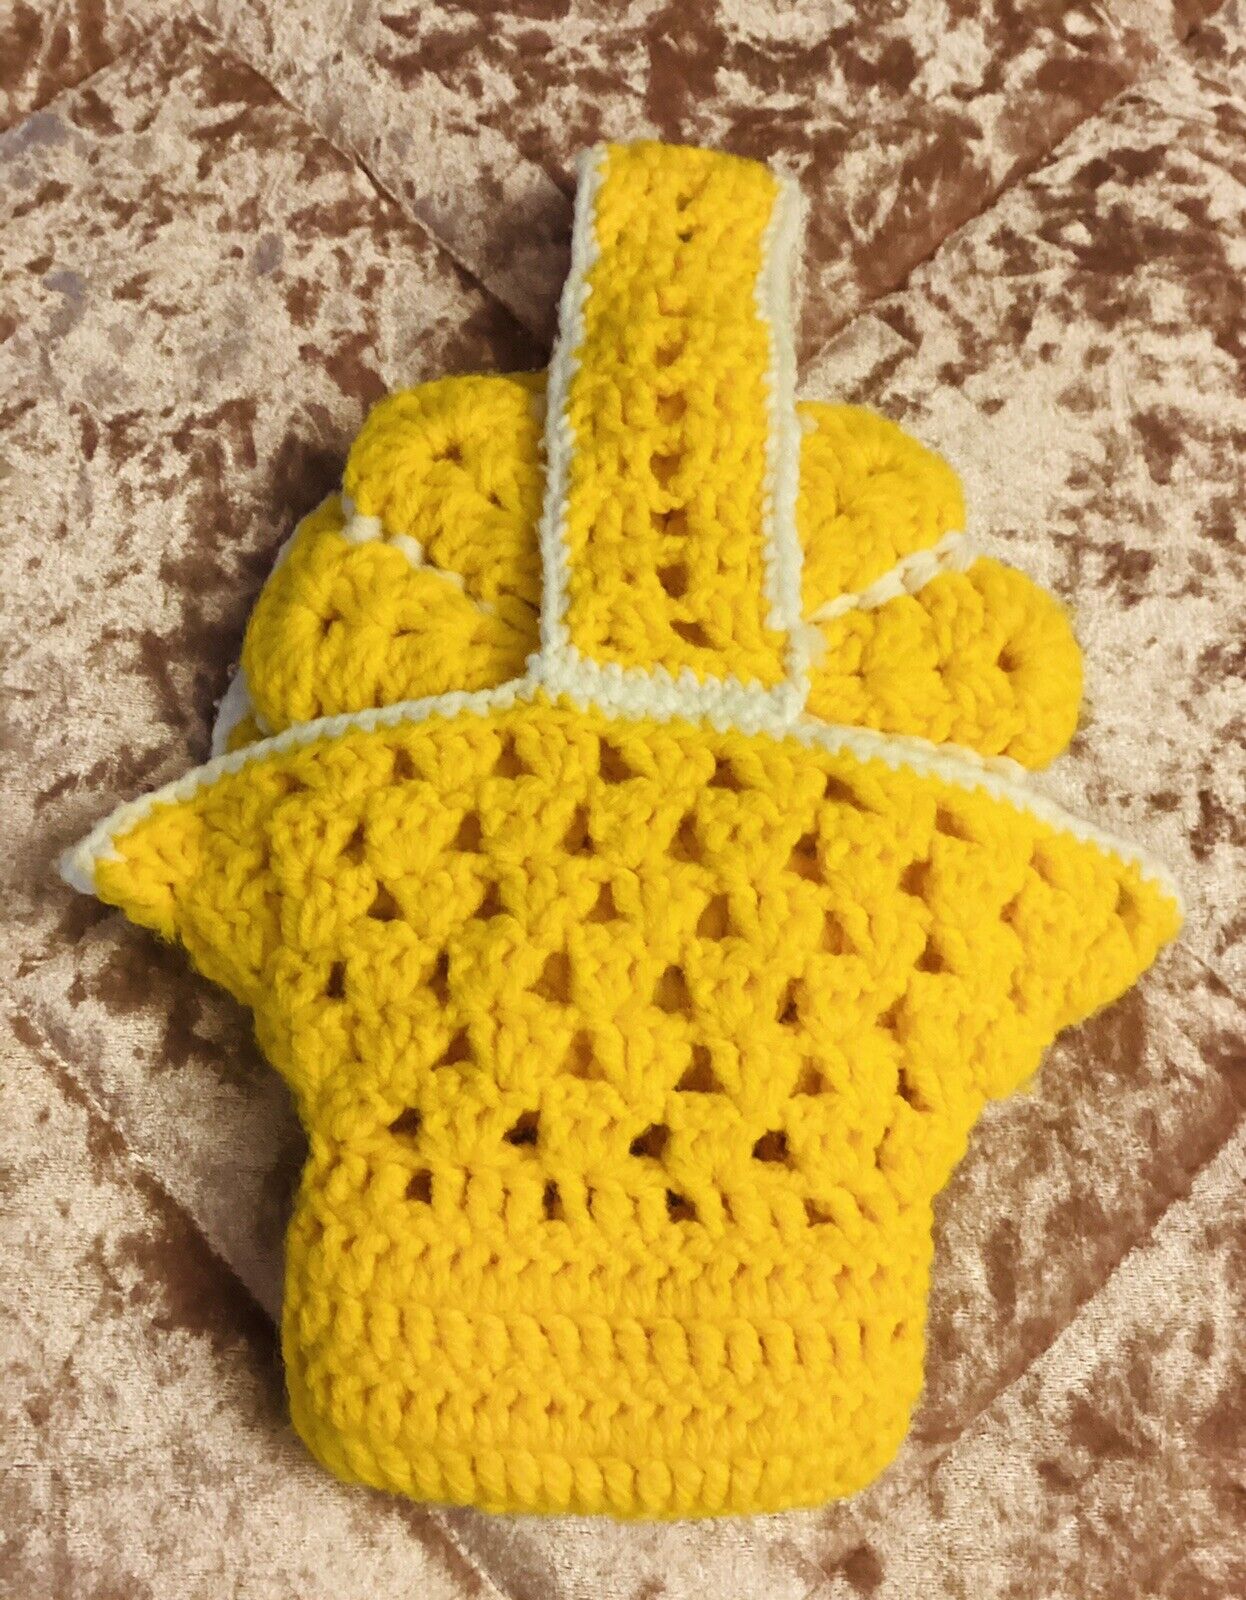 Vintage Vibrant Yellow and White Hand Crocheted Decorative Potholders and Basket